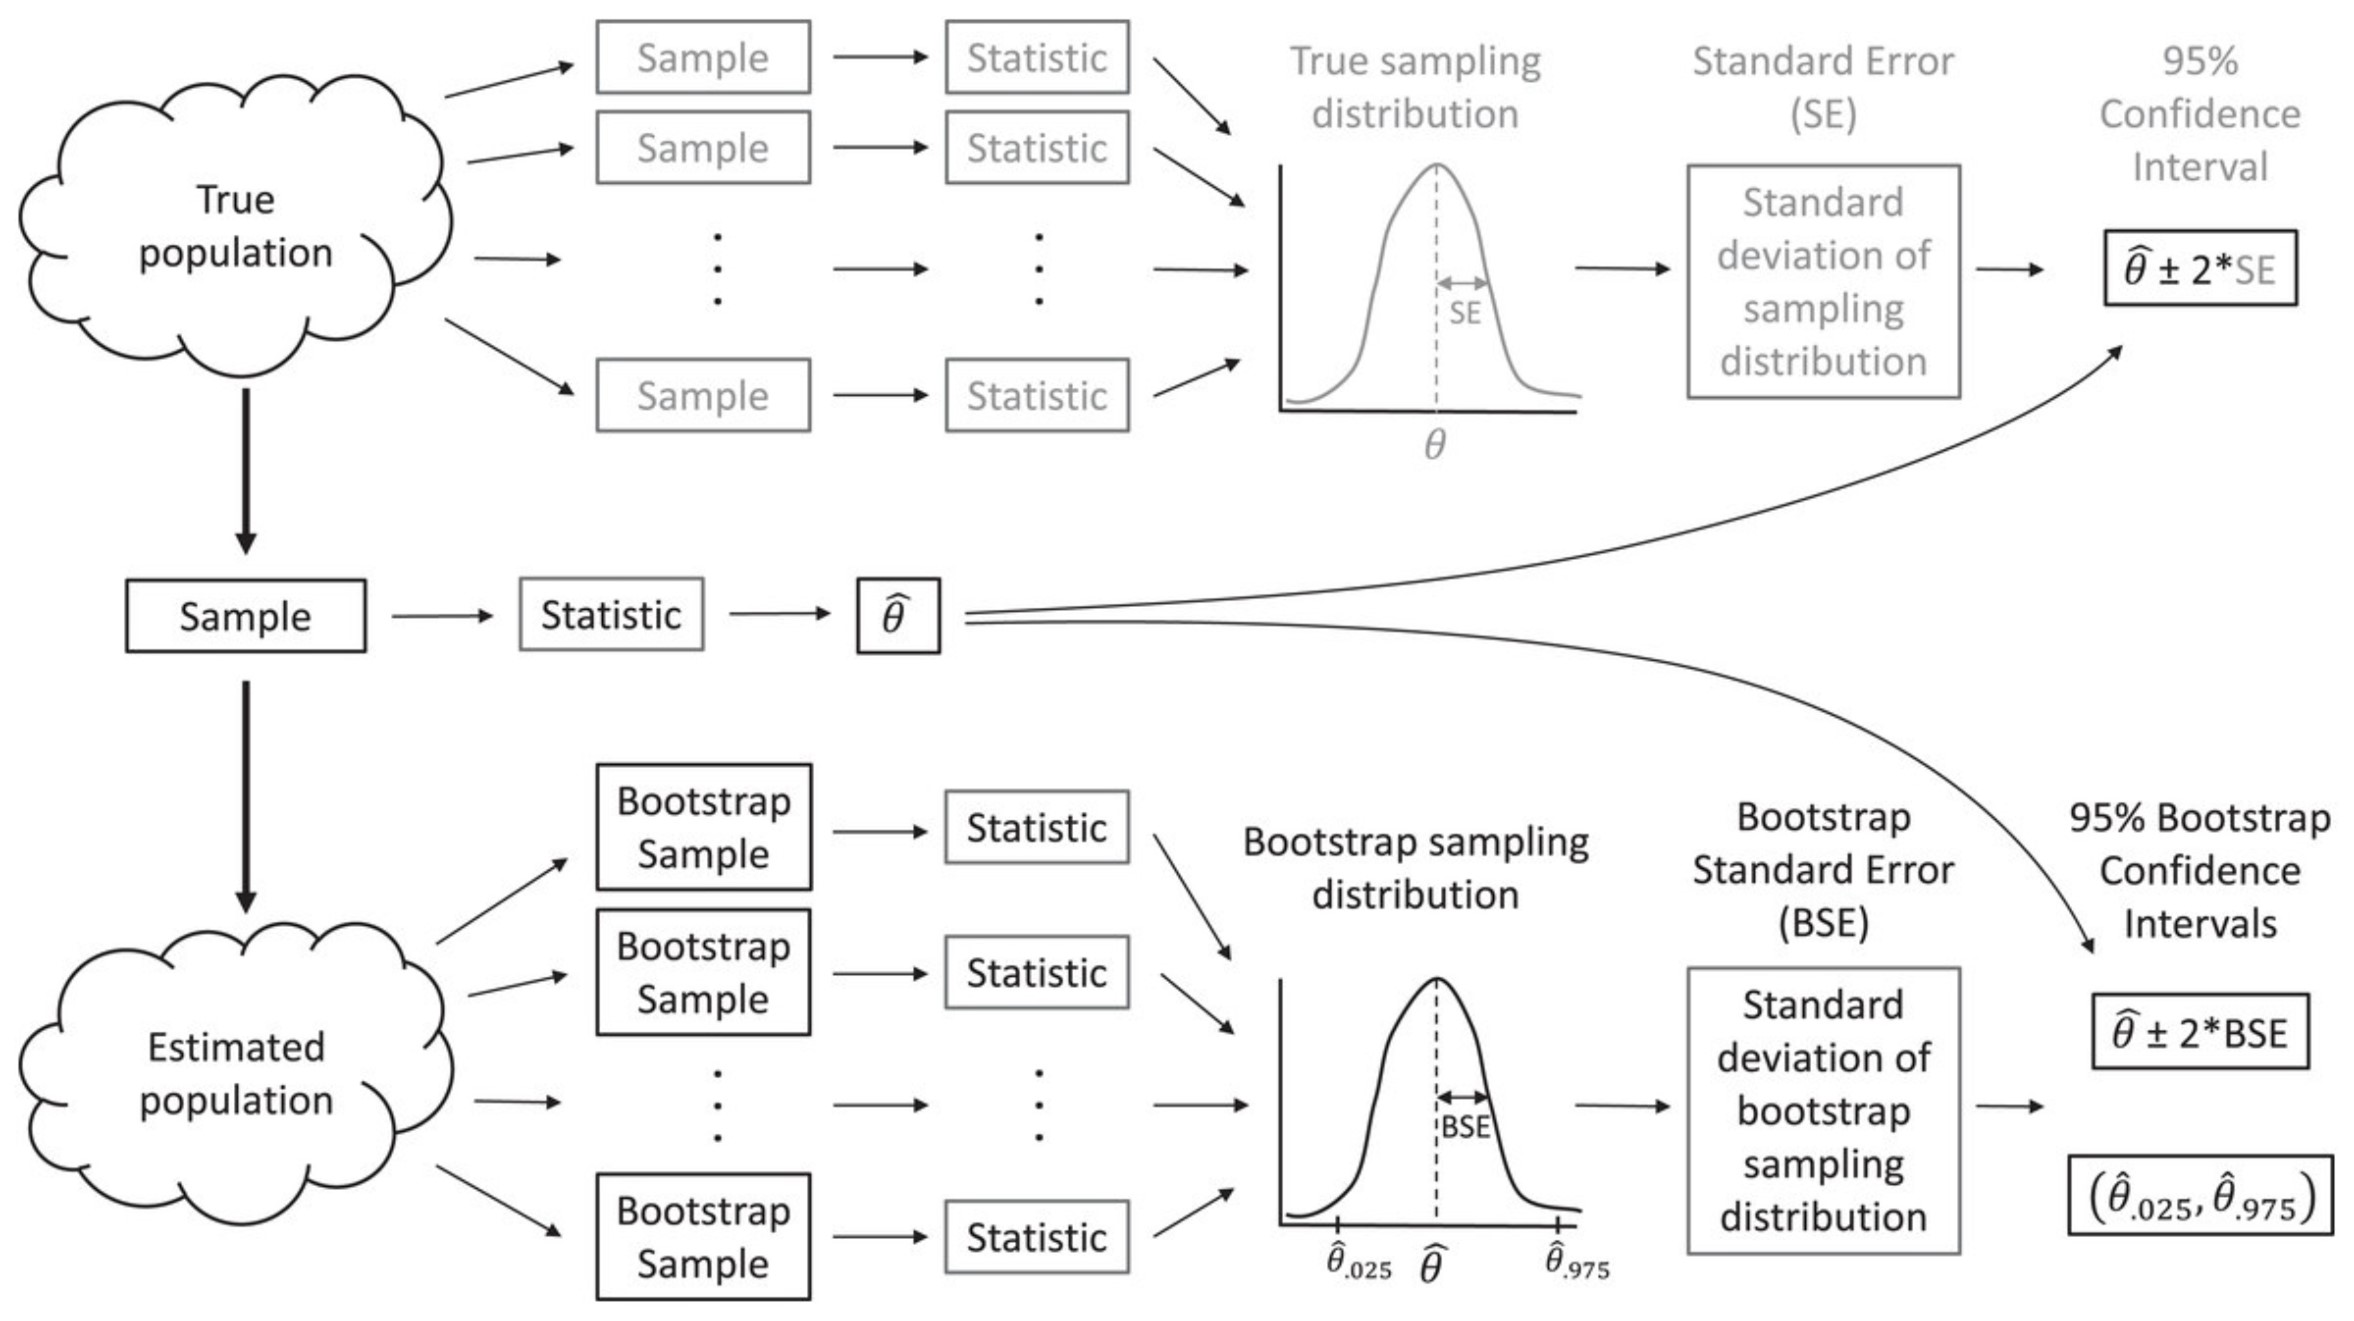 The bootstrap allows us to estimate characteristics of the sampling distribution (e.g., its standard deviation) by repeatedly sampling from an estimated population.  Figure from Fieberg, J. R., Vitense, K., and Johnson, D. H. (2020). Resampling-based methods for biologists. PeerJ, 8, e9089.  DOI: 10.7717/peerj.9089/fig-2